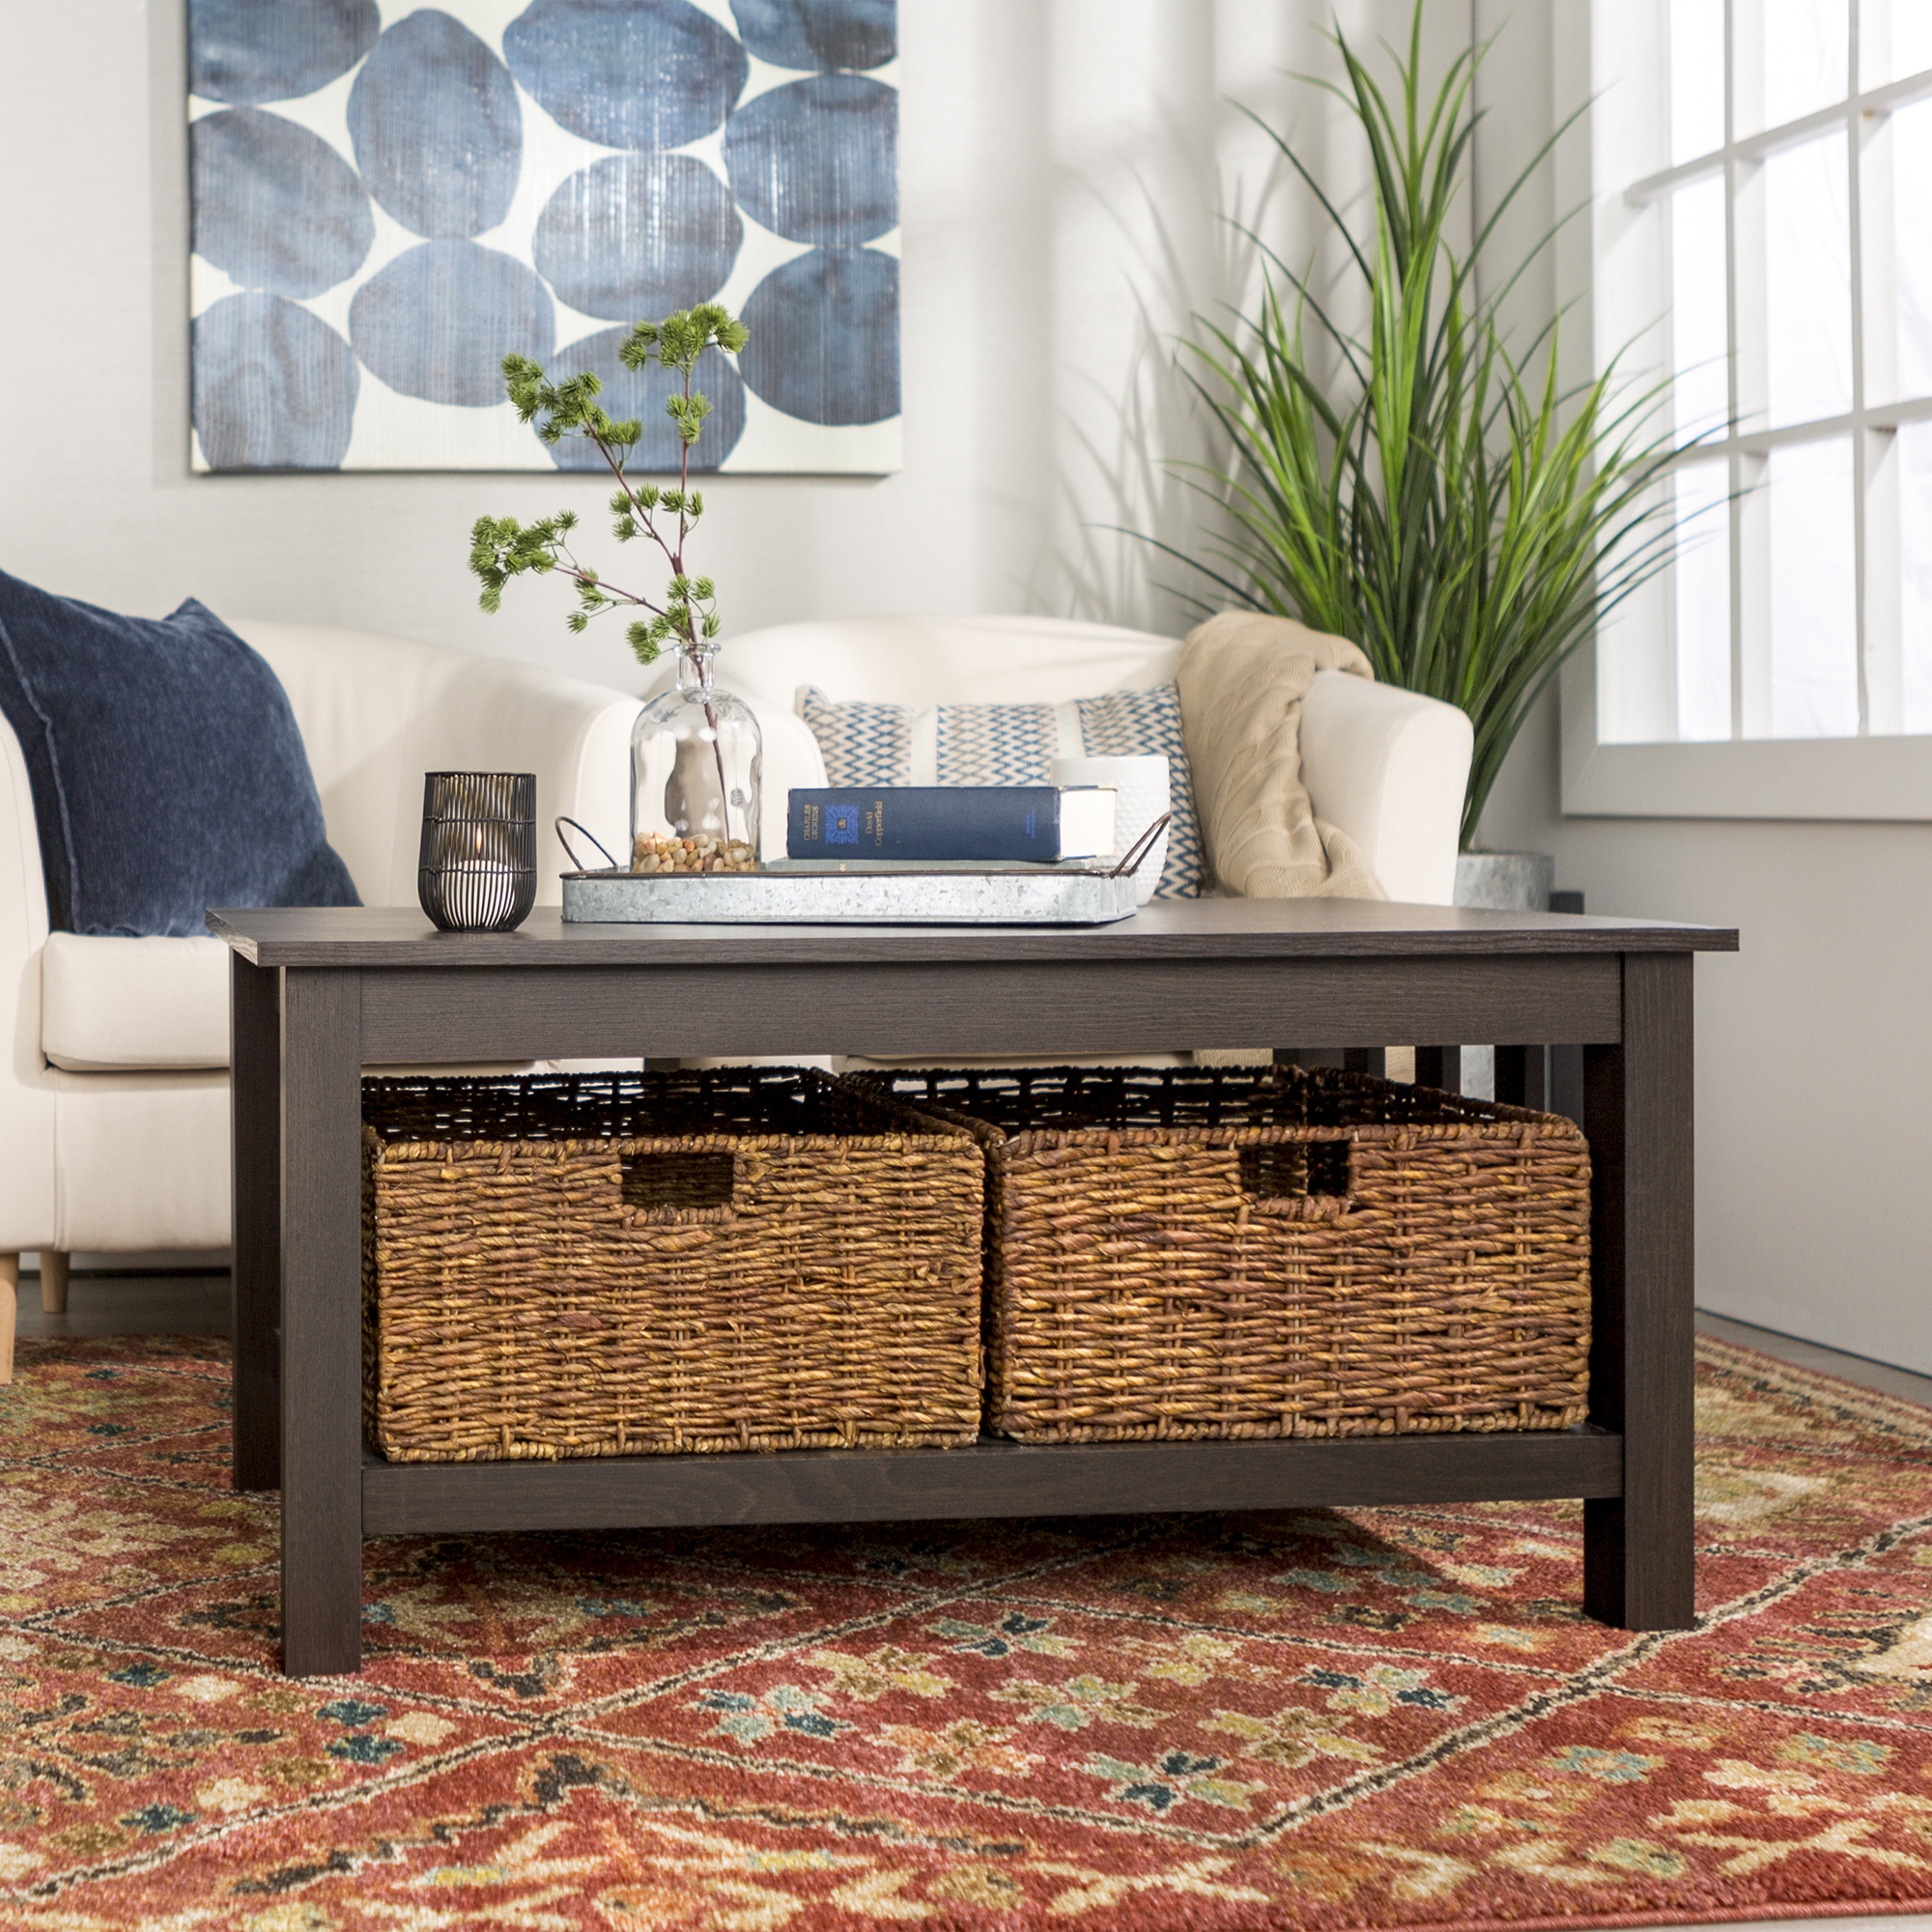 Mission Storage Coffee Table with Baskets - Espresso - Image 4